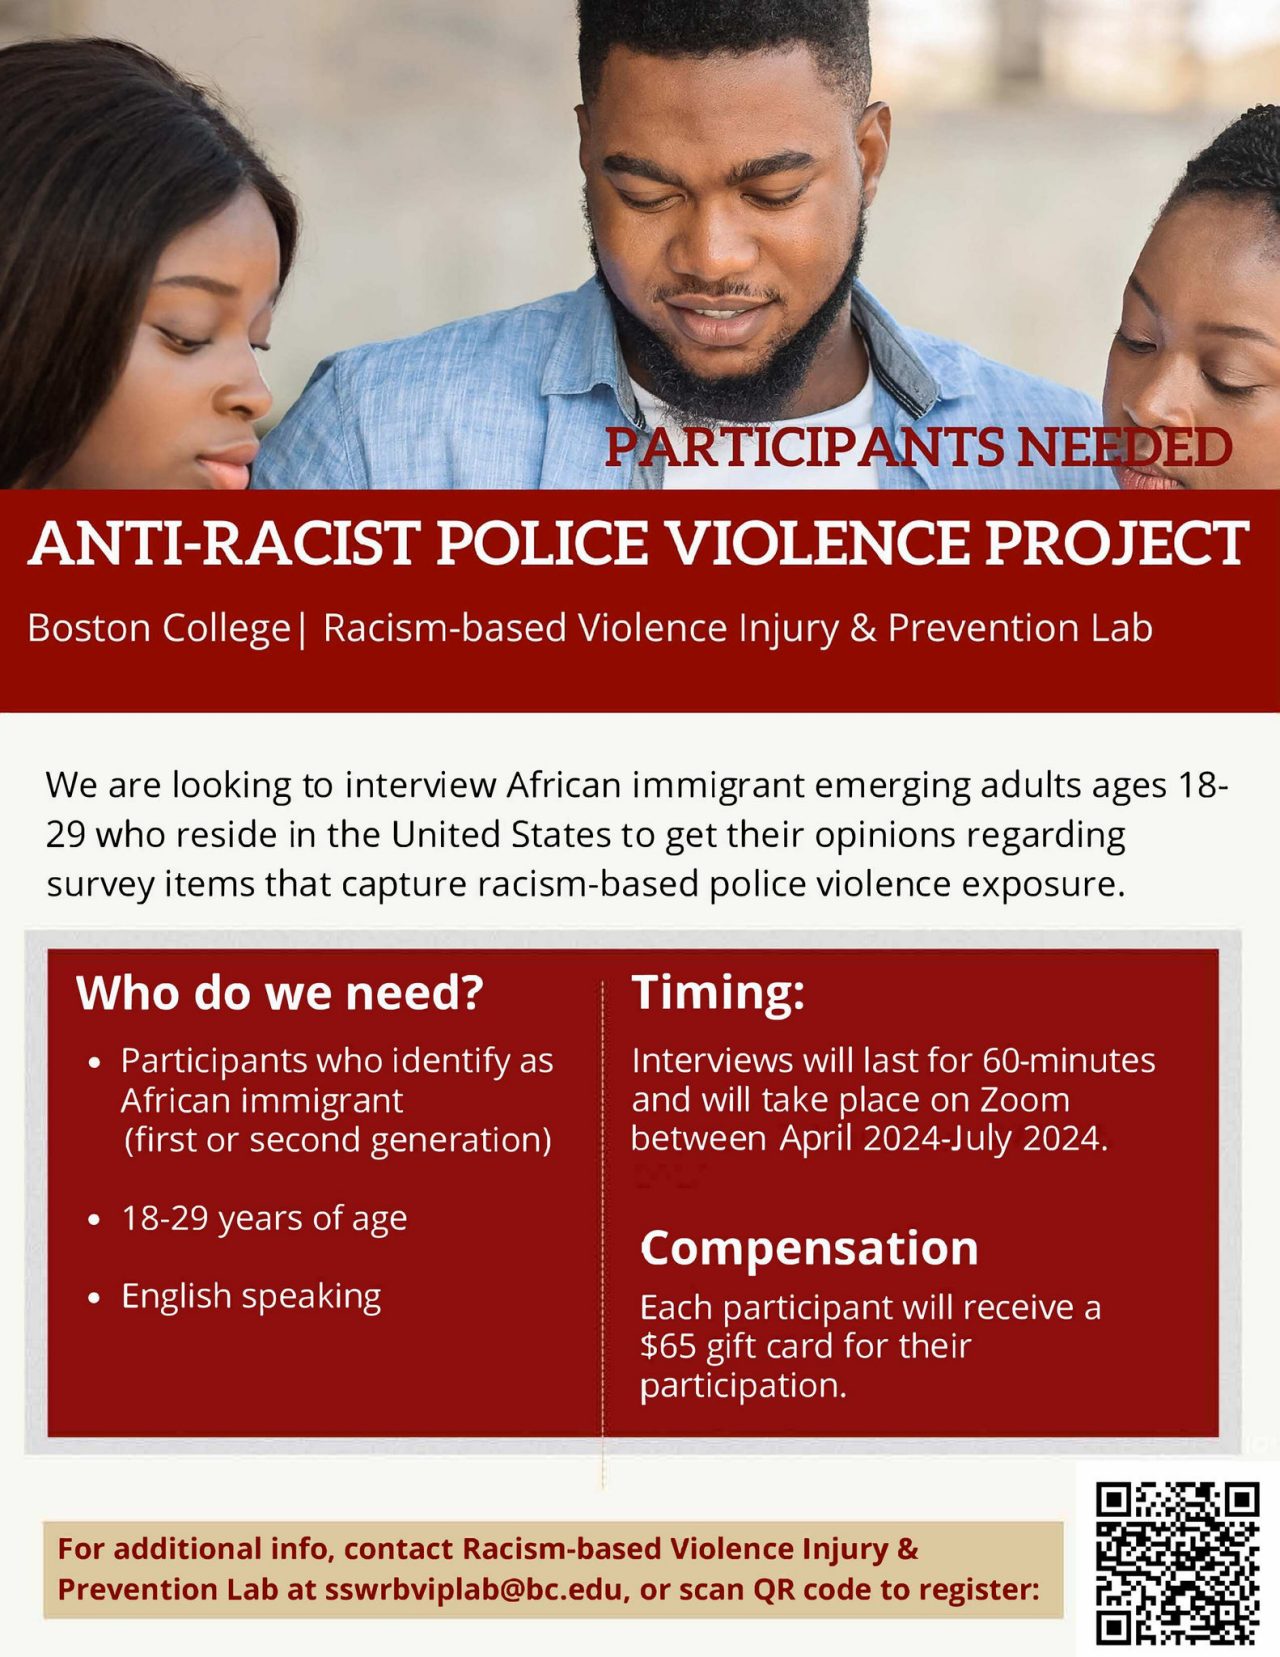 Anti-racist Police Violence Project Cognitive Interview Flyer